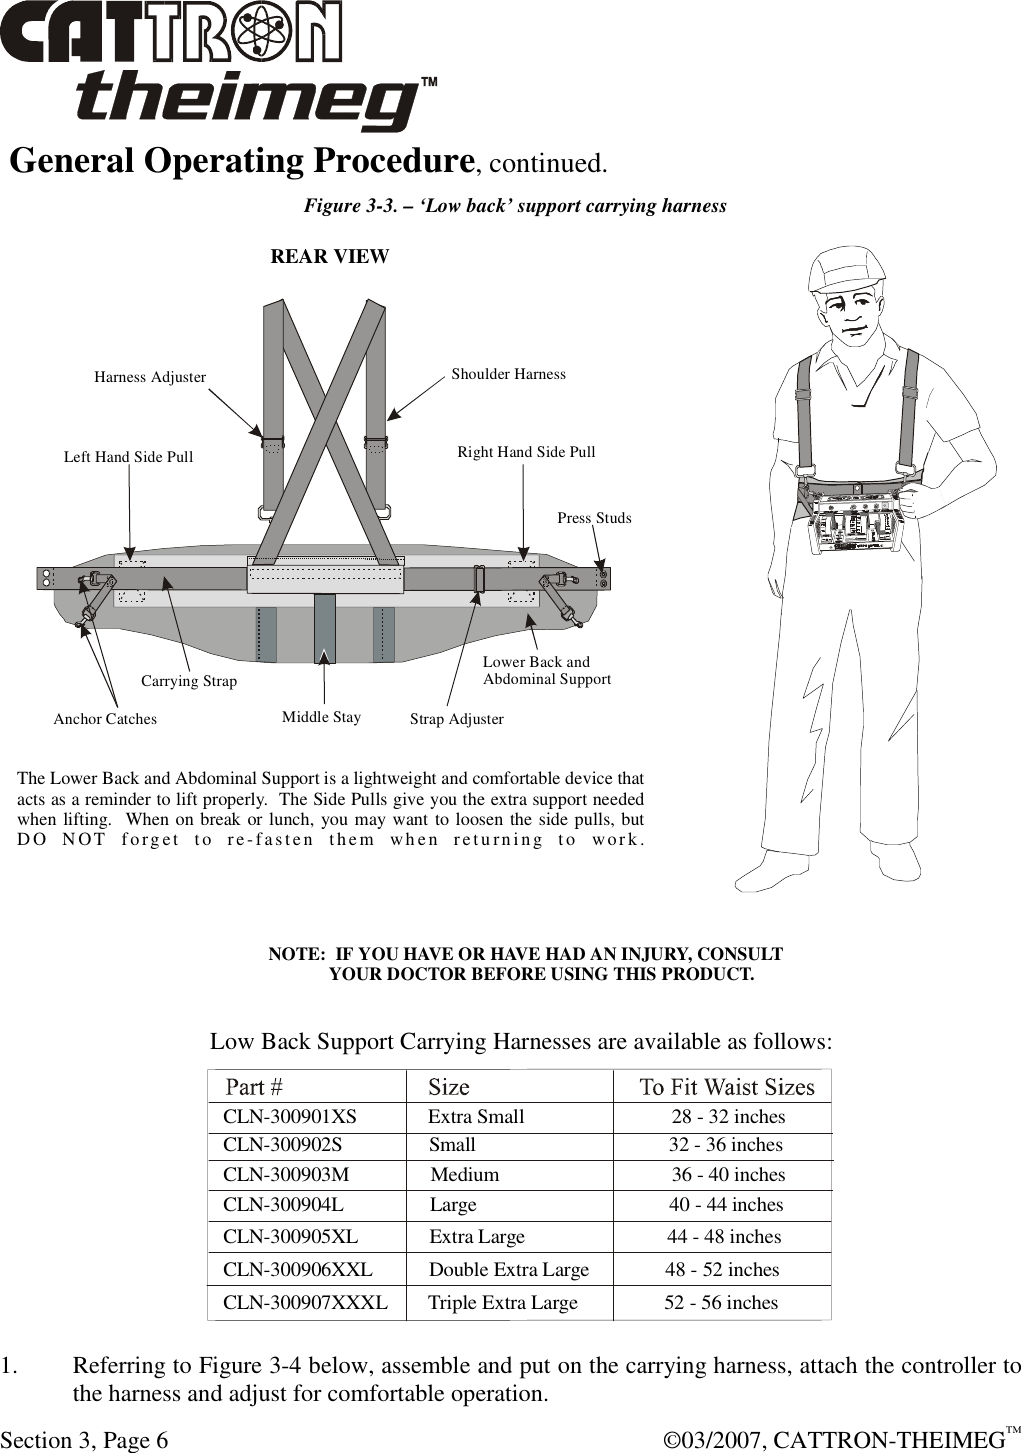  Section 3, Page 6    ©03/2007, CATTRON-THEIMEG™  General Operating Procedure, continued.    Figure 3-3. – ‘Low back’ support carrying harness  1.  Referring to Figure 3-4 below, assemble and put on the carrying harness, attach the controller to the harness and adjust for comfortable operation.  Middle Stay Strap AdjusterCarrying StrapAnchor CatchesPress StudsShoulder HarnessREAR VIEWHarness AdjusterRight Hand Side PullLeft Hand Side PullLower Back andAbdominal SupportLow Back Support Carrying Harnesses are available as follows:The Lower Back and Abdominal Support is a lightweight and comfortable device thatacts as a reminder to lift properly.  The Side Pulls give you the extra support neededwhen lifting.   When on break or lunch, you may want to loosen the side pulls, butD O  N OT   forg e t  t o  re- fas ten   the m   w h e n  r e tu rn i n g  t o   work.CLN-300902S                 Small                                      32 - 36 inchesCLN-300903M                Medium                                  36 - 40 inchesCLN-300904L                 Large                                      40 - 44 inchesCLN-300905XL              Extra Large                            44 - 48 inchesCLN-300906XXL           Double Extra Large               48 - 52 inchesCLN-300907XXXL        Triple Extra Large                 52 - 56 inchesCLN-300901XS              Extra Small                             28 - 32 inchesNOTE:  IF YOU HAVE OR HAVE HAD AN INJURY, CONSULT        YOUR DOCTOR BEFORE USING THIS PRODUCT.